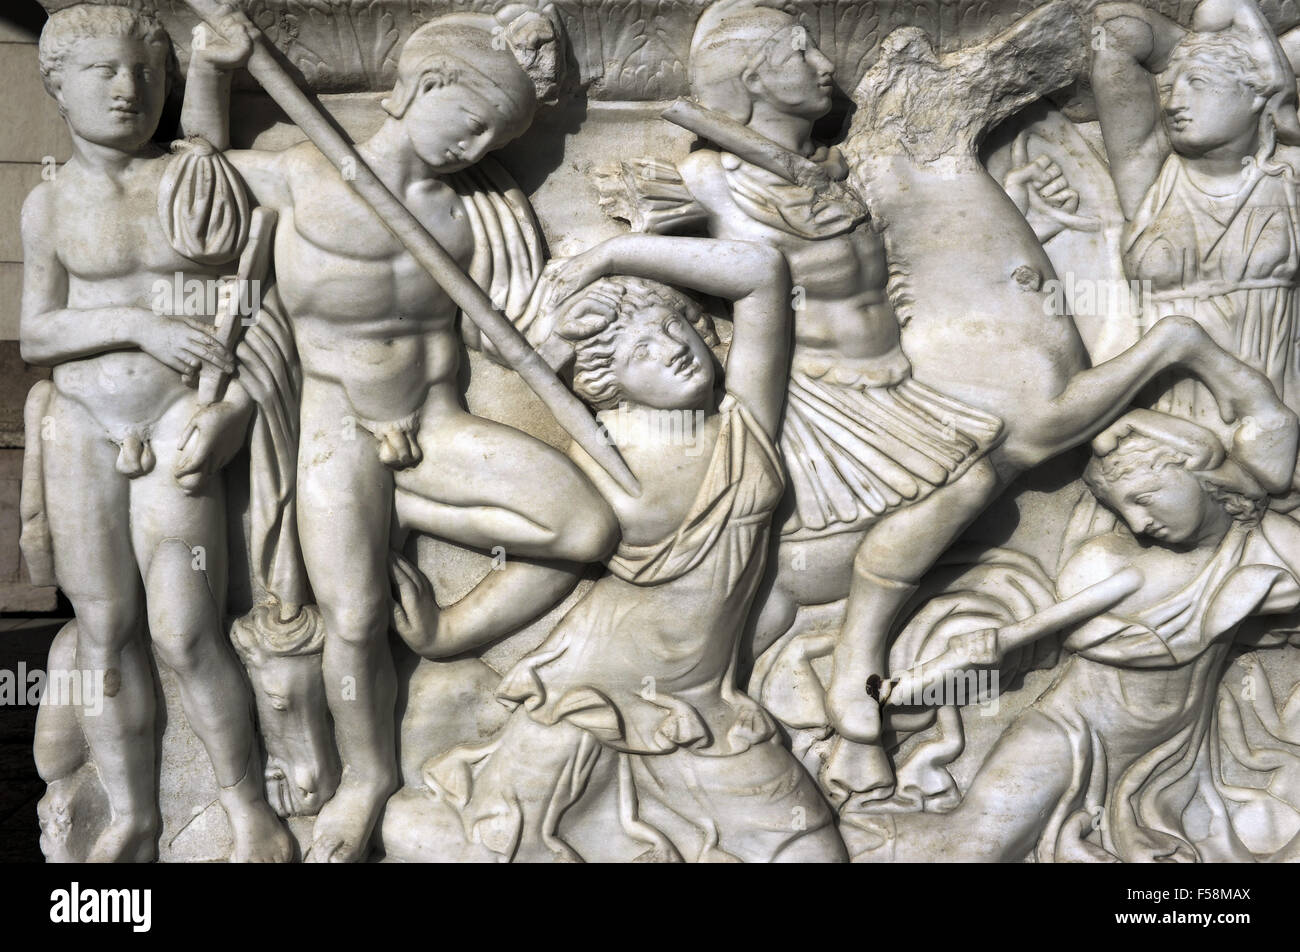 Amazon sarcophagus. Marble. Tel Mevorah. Roman Period. Early 3rd century AD. Detail. Battle between the Amazons and the Greeks. Relief. Rockefeller Archaeological Museum. Jerusalem. Israel. Stock Photo